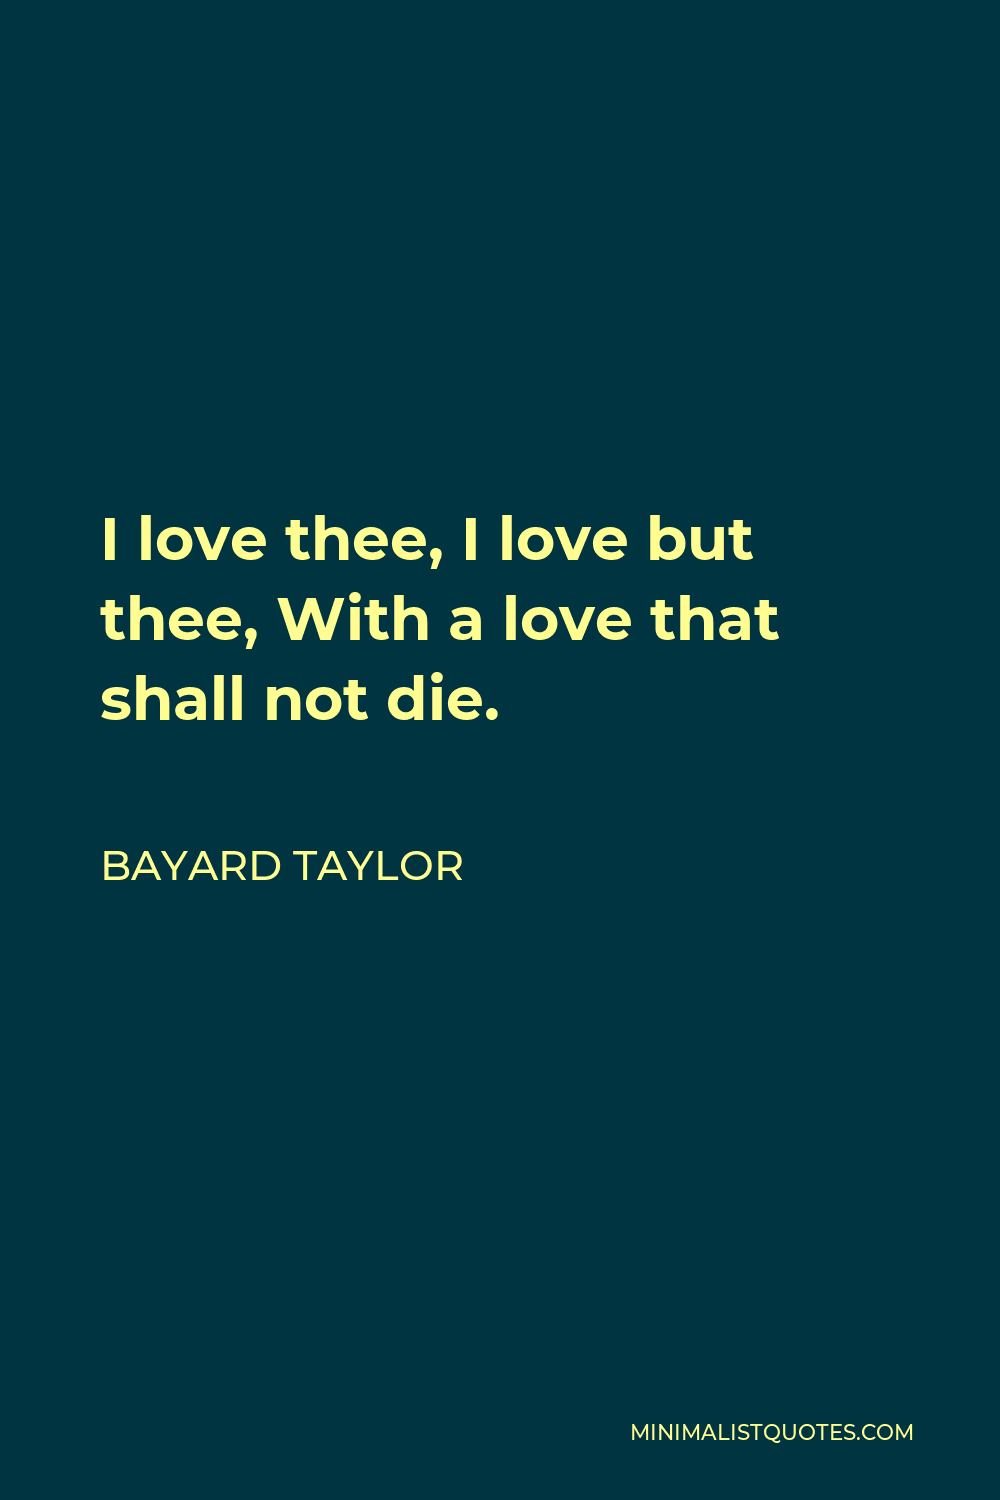 Bayard Taylor Quote - I love thee, I love but thee, With a love that shall not die.